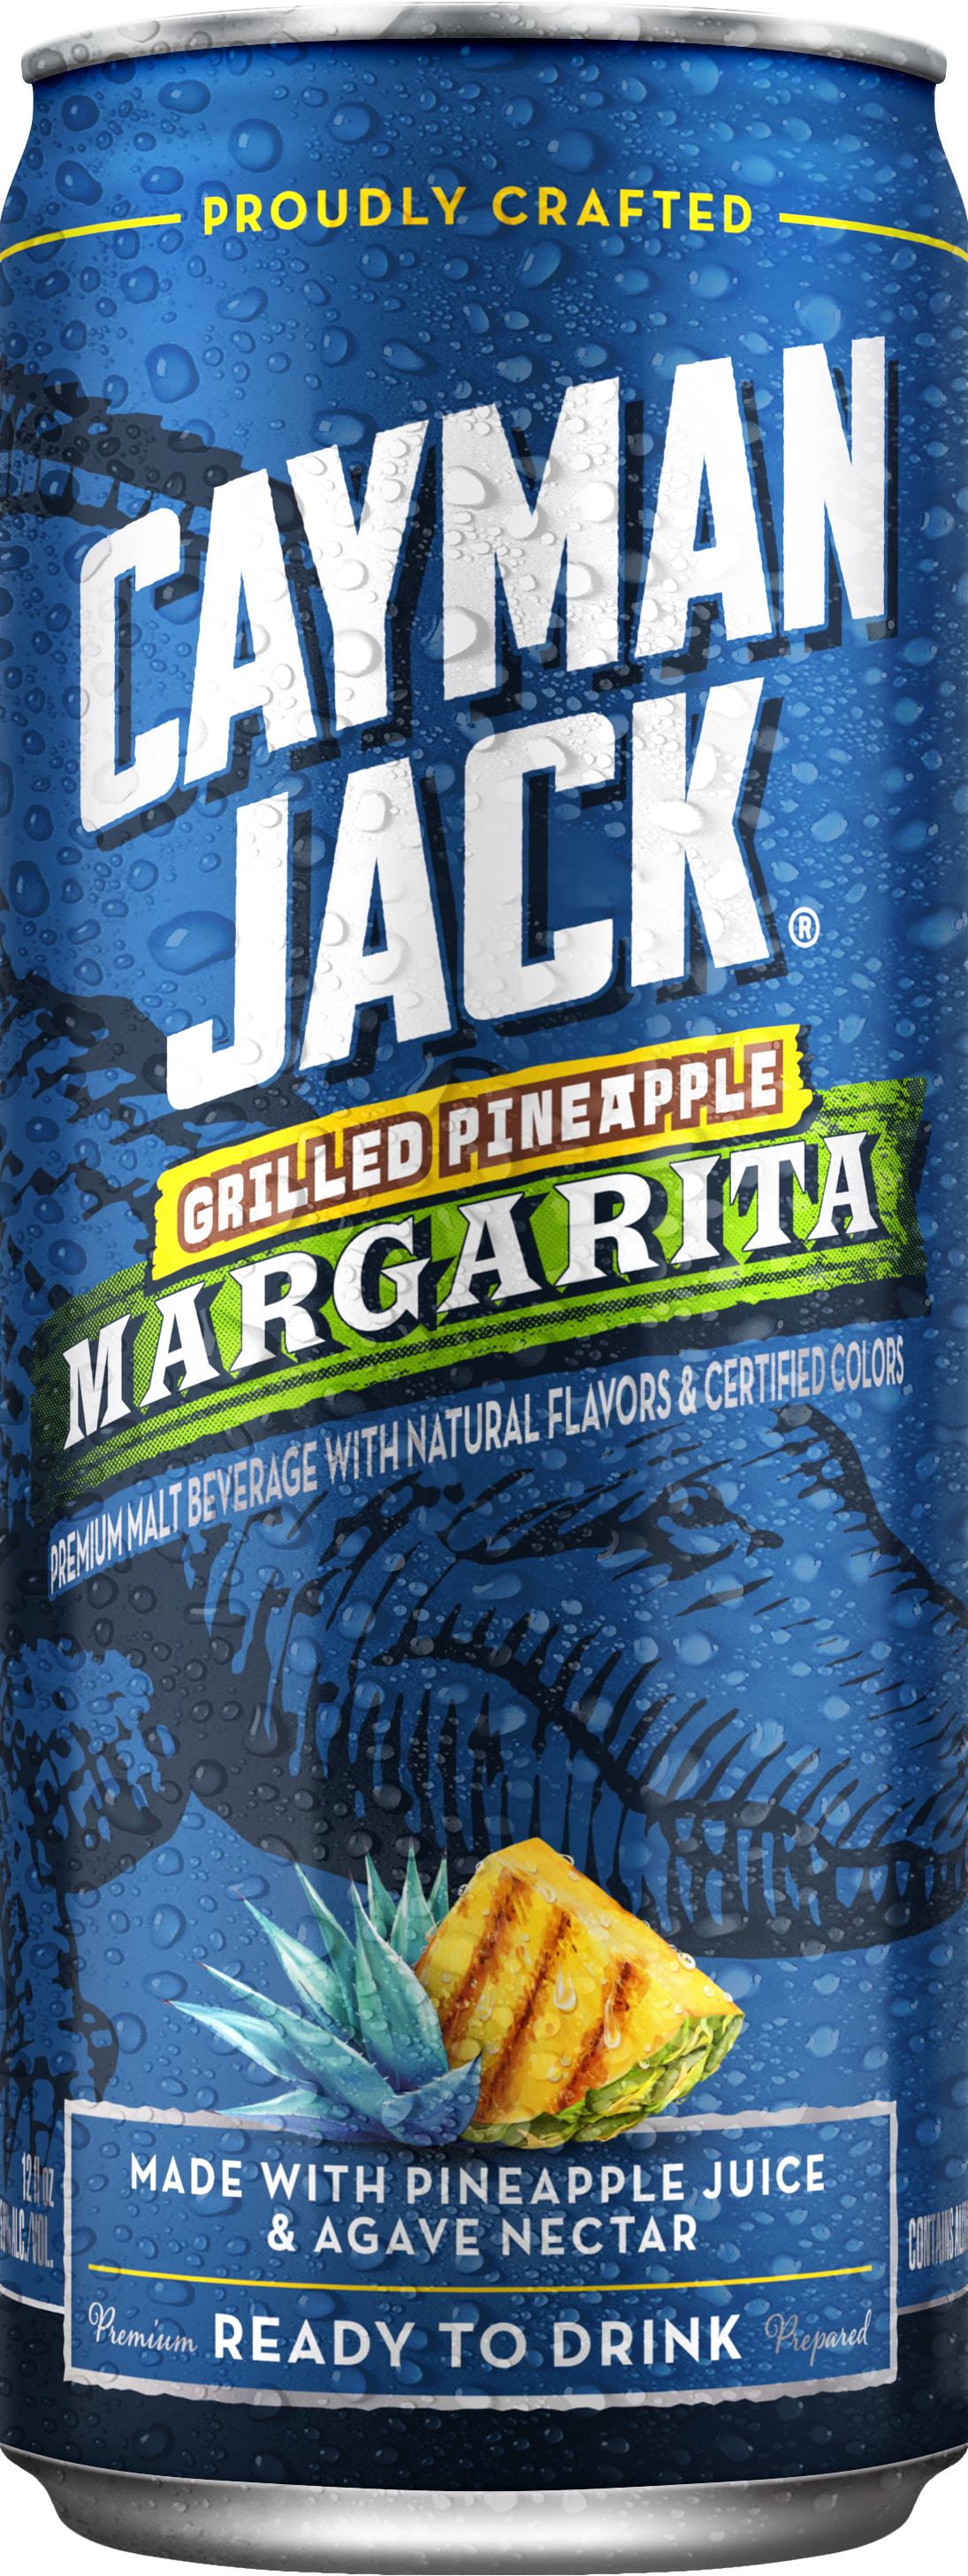 Grilled Pineapple Margarita Can